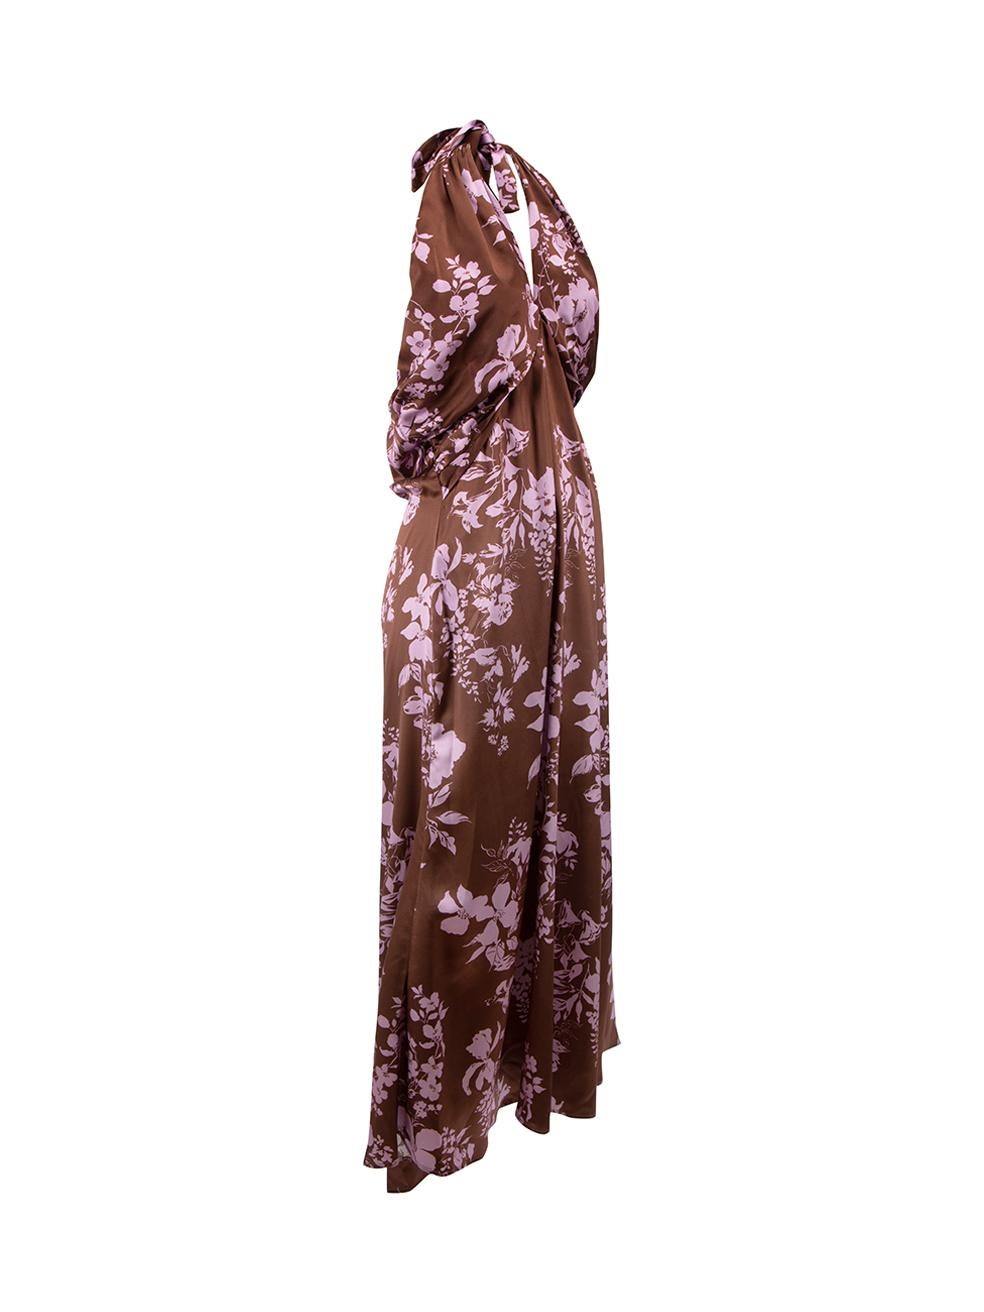 CONDITION is Very good. Hardly any visible wear to dress is evident on this used Reformation designer resale item.



Details


Brown

Silk

Dress

Purple floral print

Halter Neck tie

V-neck

Midi length

Back zip fastening





Made in